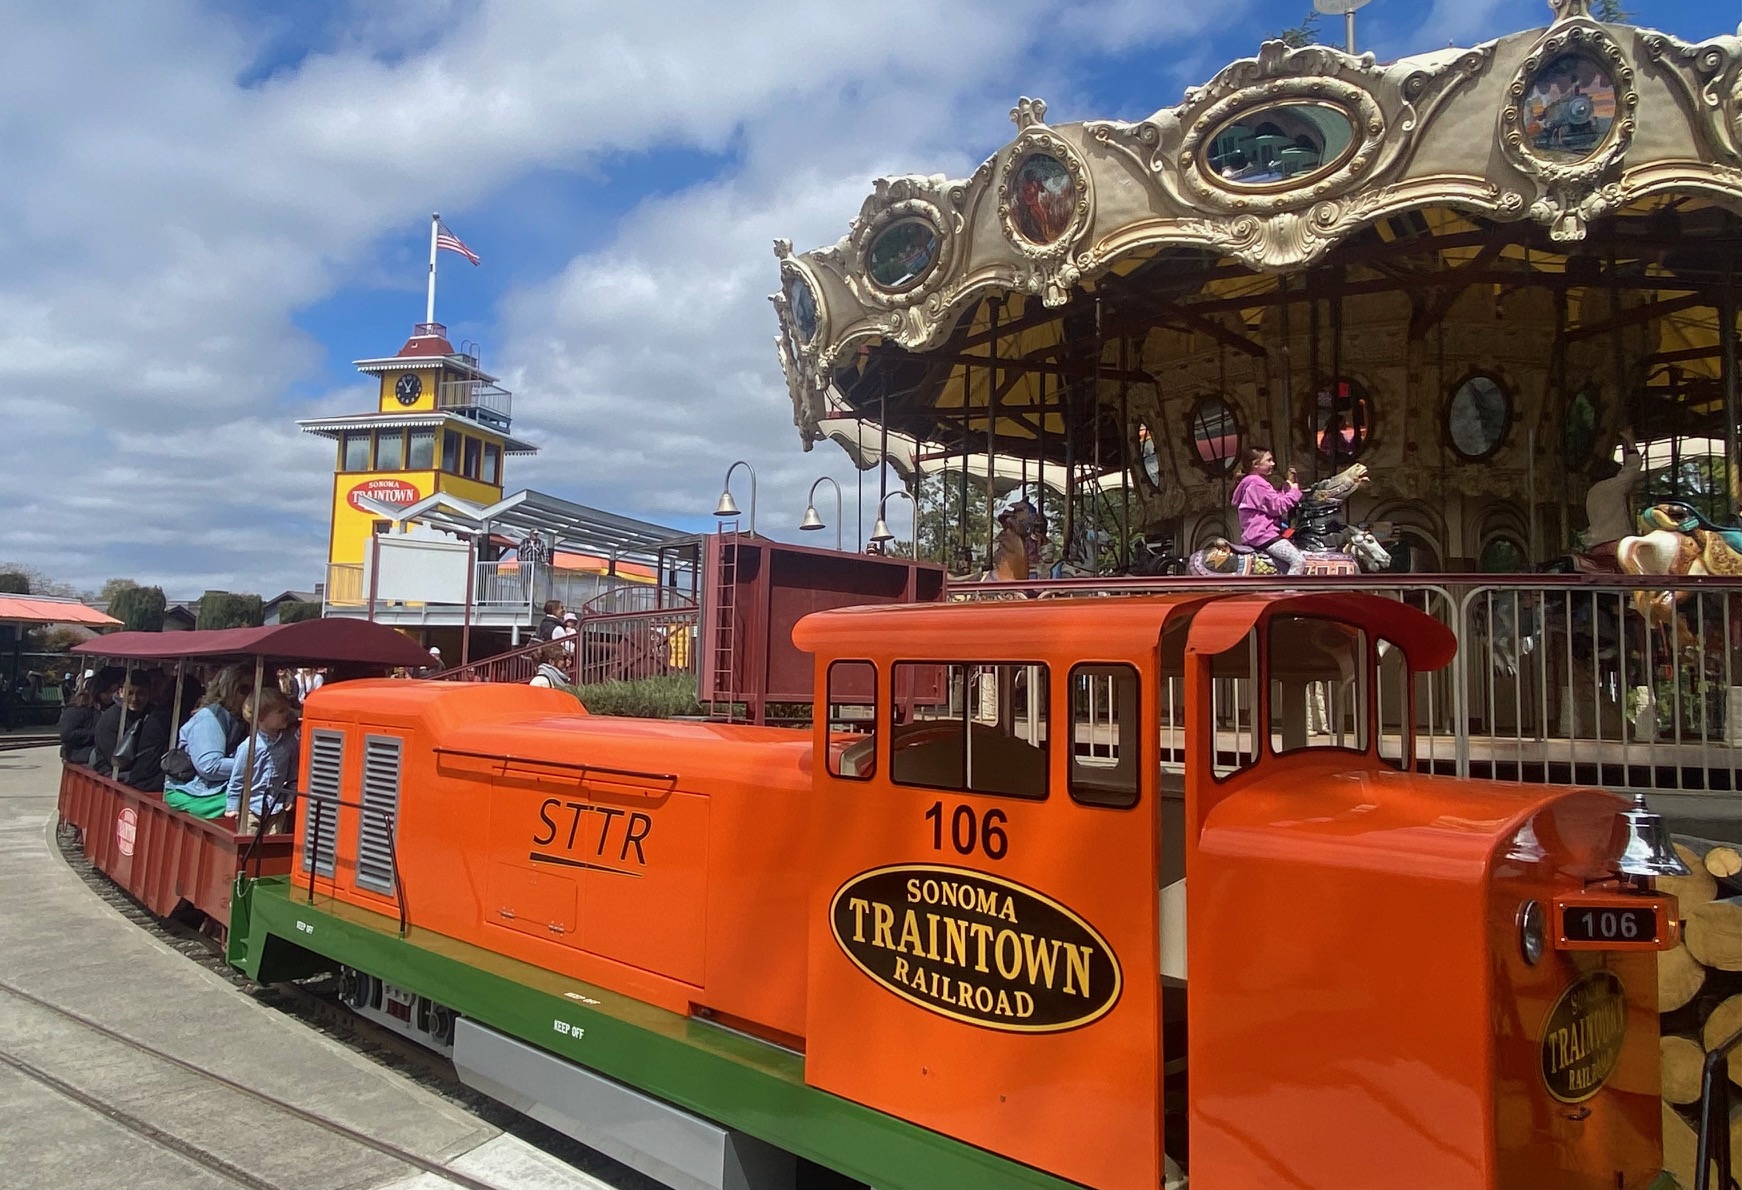 An orange kids' train ride emblazoned with the words &quot;Sonoma Traintown Railroad&quot; is pictured with a carousel in the background.